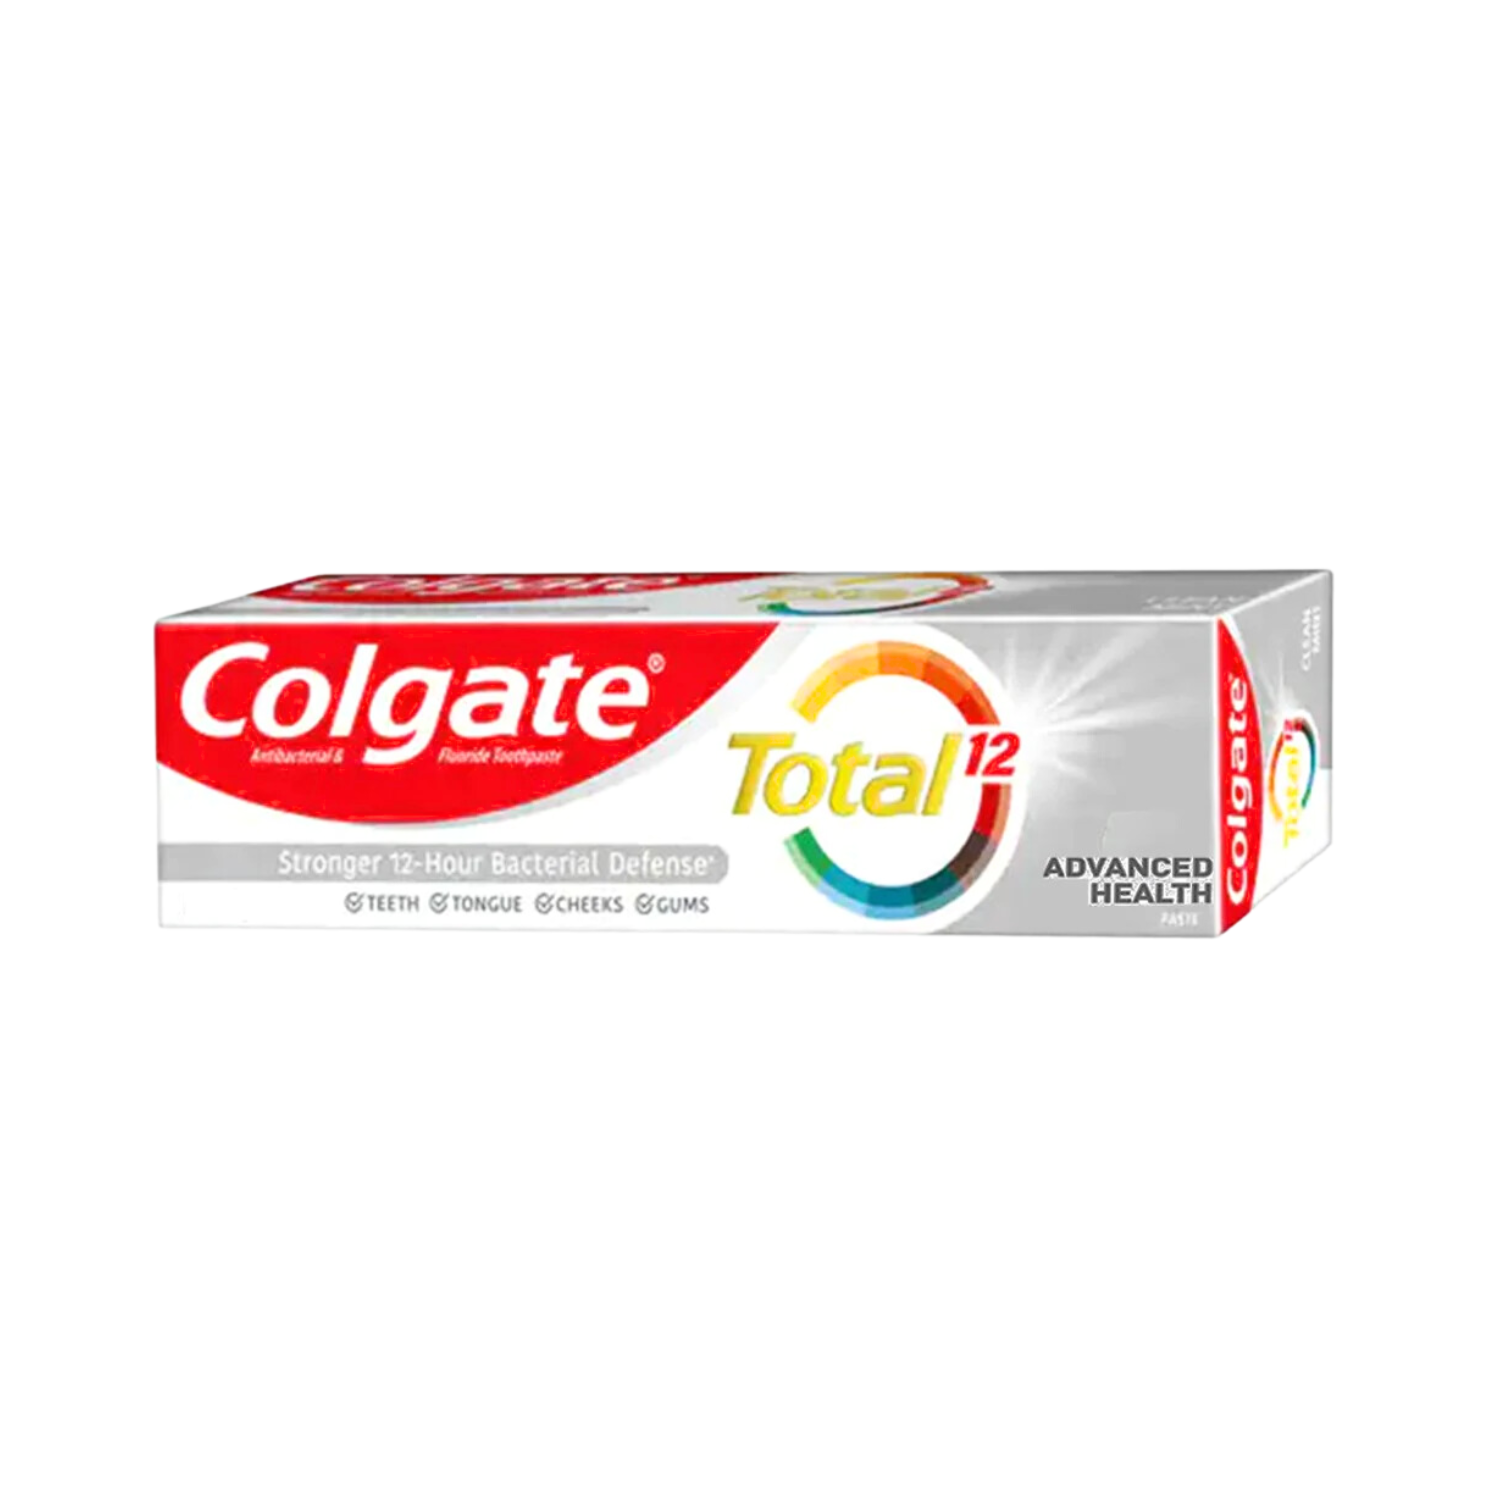 colgate-total-advanced-health-toothpaste-100g